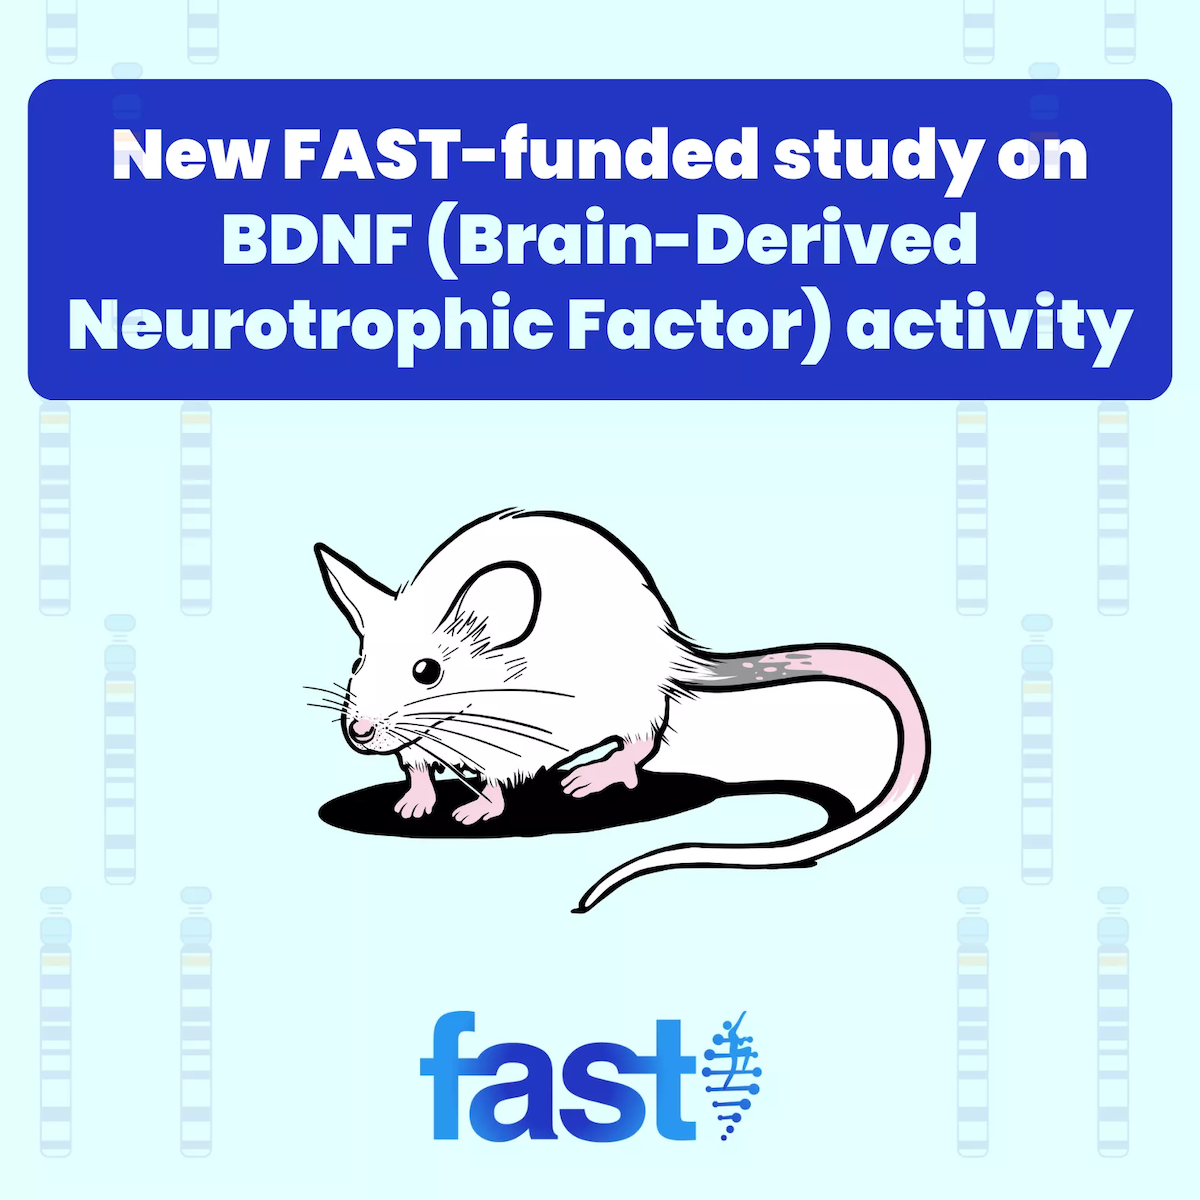 Image for New FAST-funded study on Brain-Derived Neurotrophic Factor activity